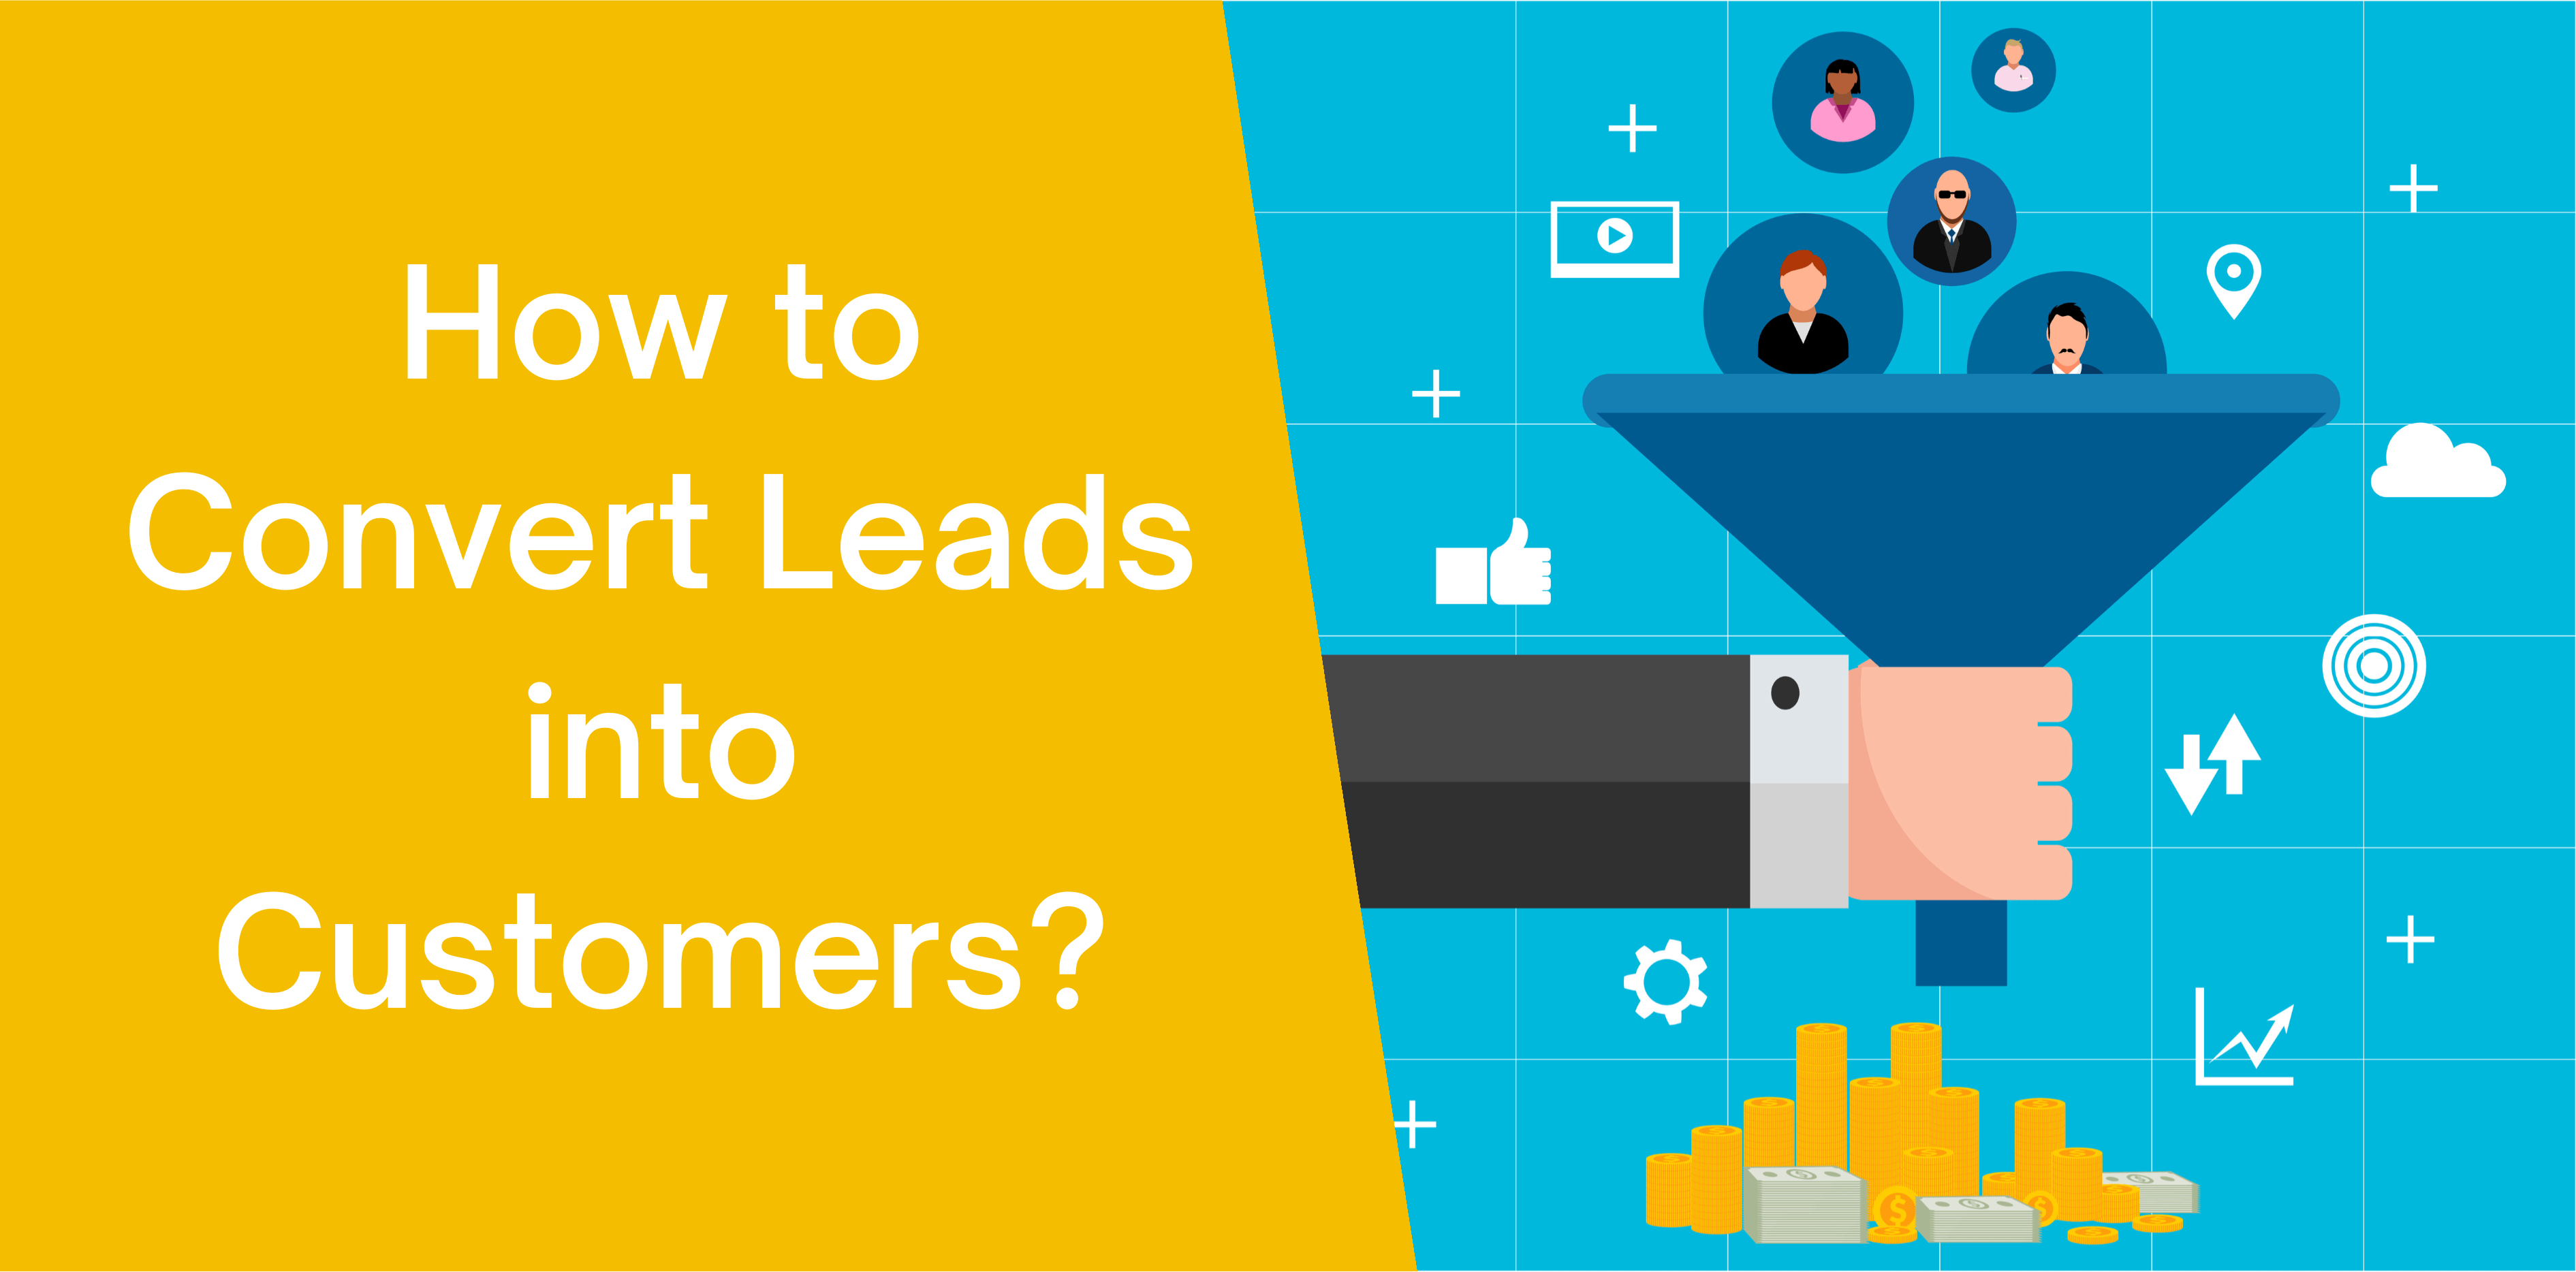 10 Tips for Converting Leads into More Customers